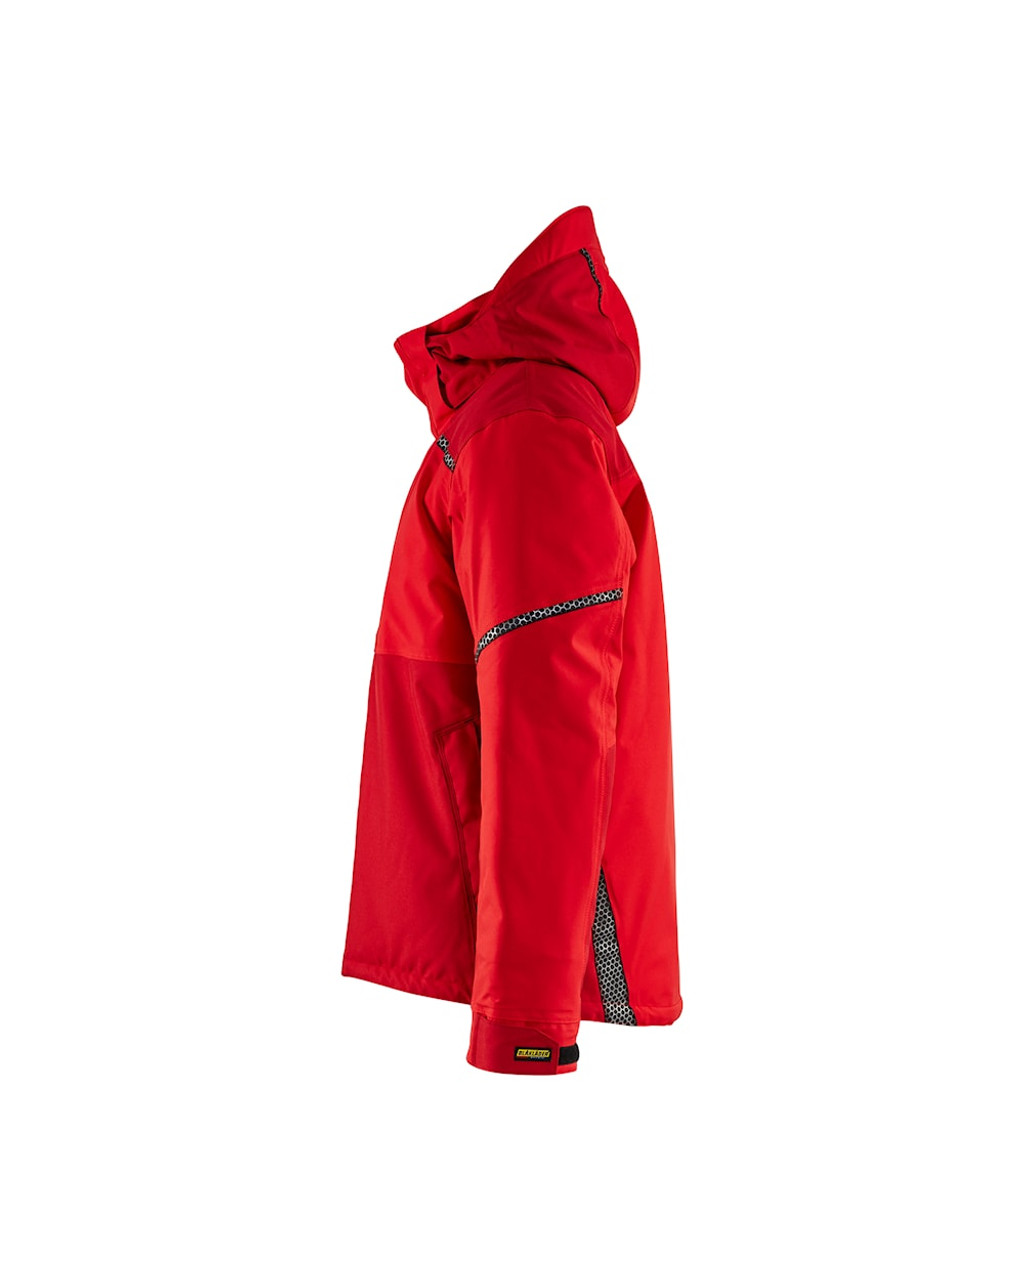 Buy online in Australia and New Zealand a Mens Red Jacket  for Electricians that are comfortable and durable.